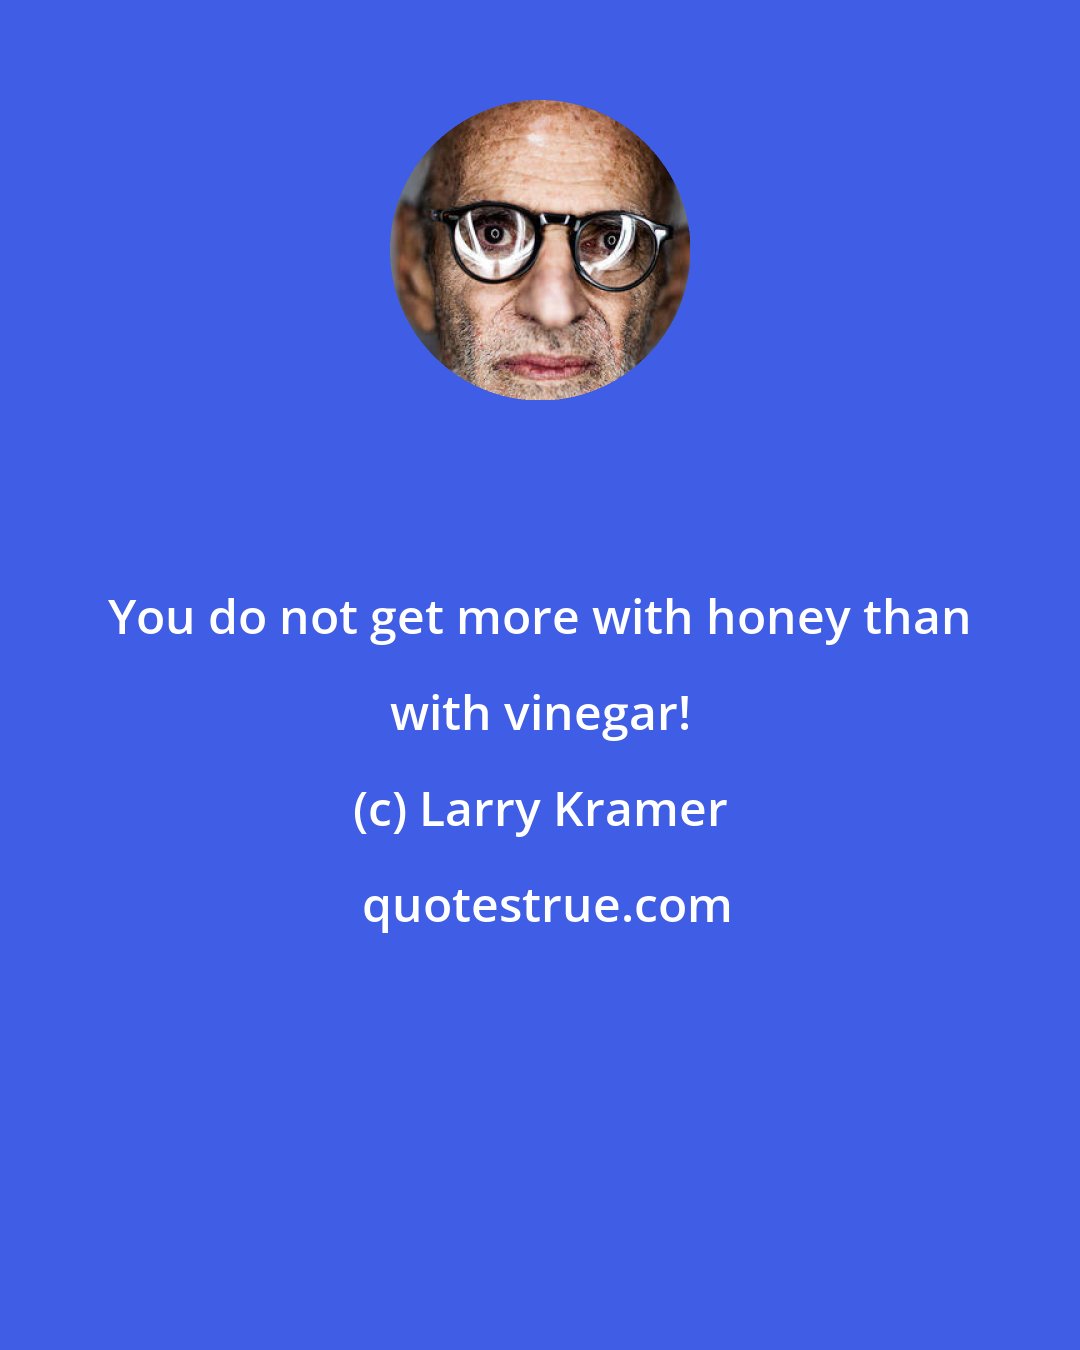 Larry Kramer: You do not get more with honey than with vinegar!